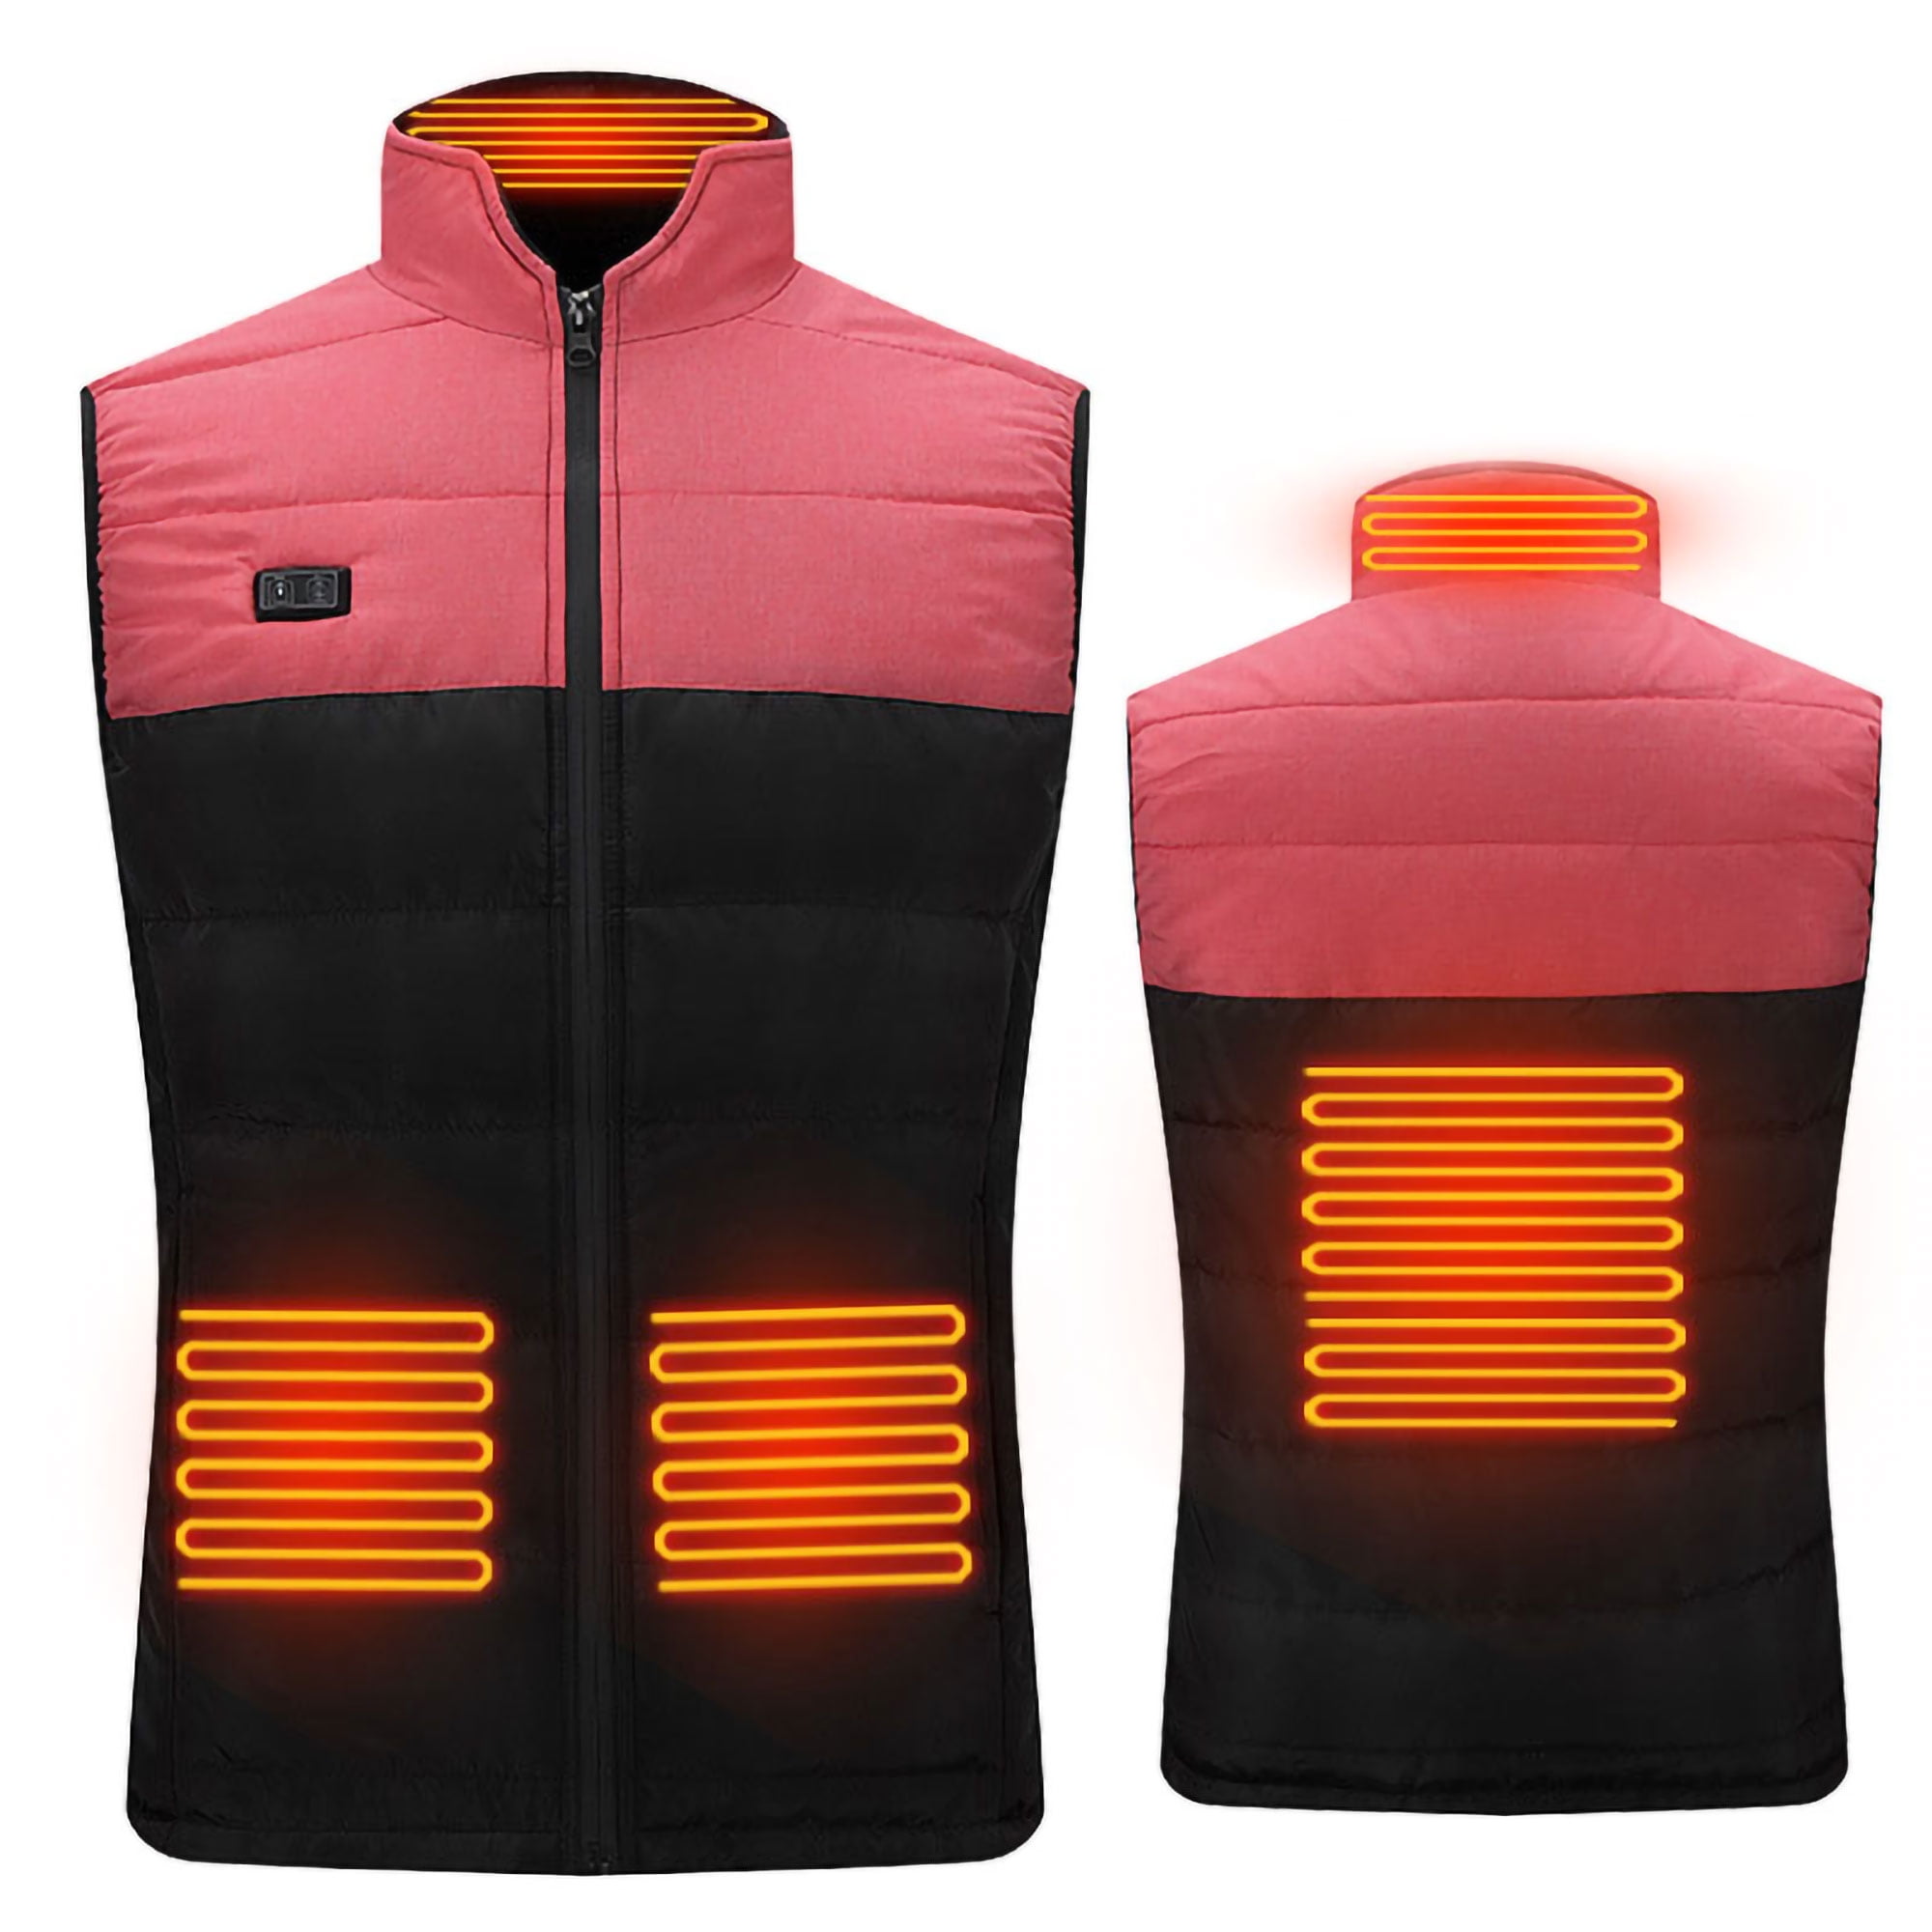 Heated Vest USB Charging Heating Vest with 5 Heated Pad Heated Jacket Clothes Lightweight Washable Heating Clothes Gilet With 3 Heat Temperature Control for Outdoor Activities 